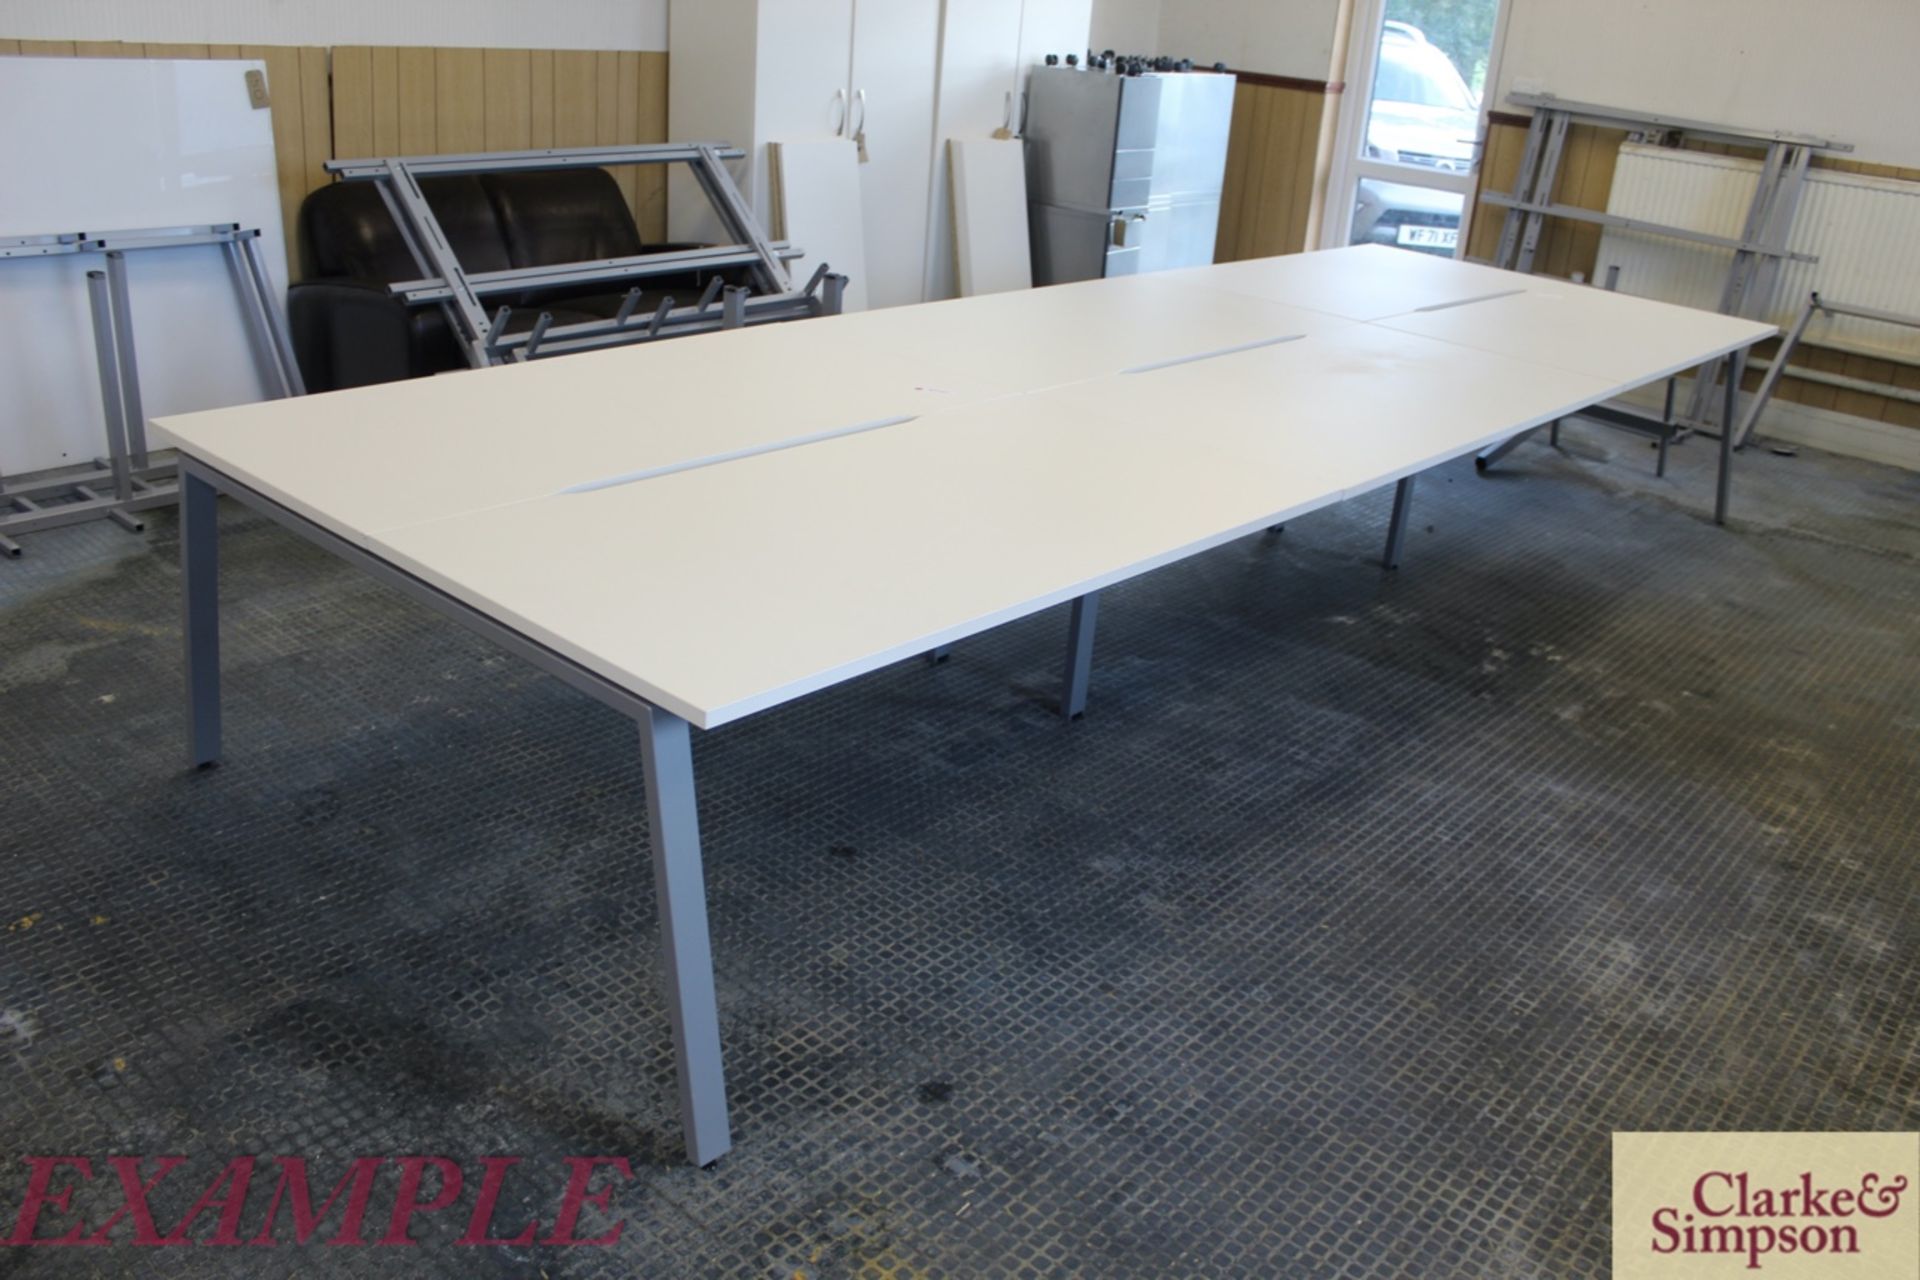 4.8m x 1.6m back-to-back sectional bench desk. Com - Image 4 of 12